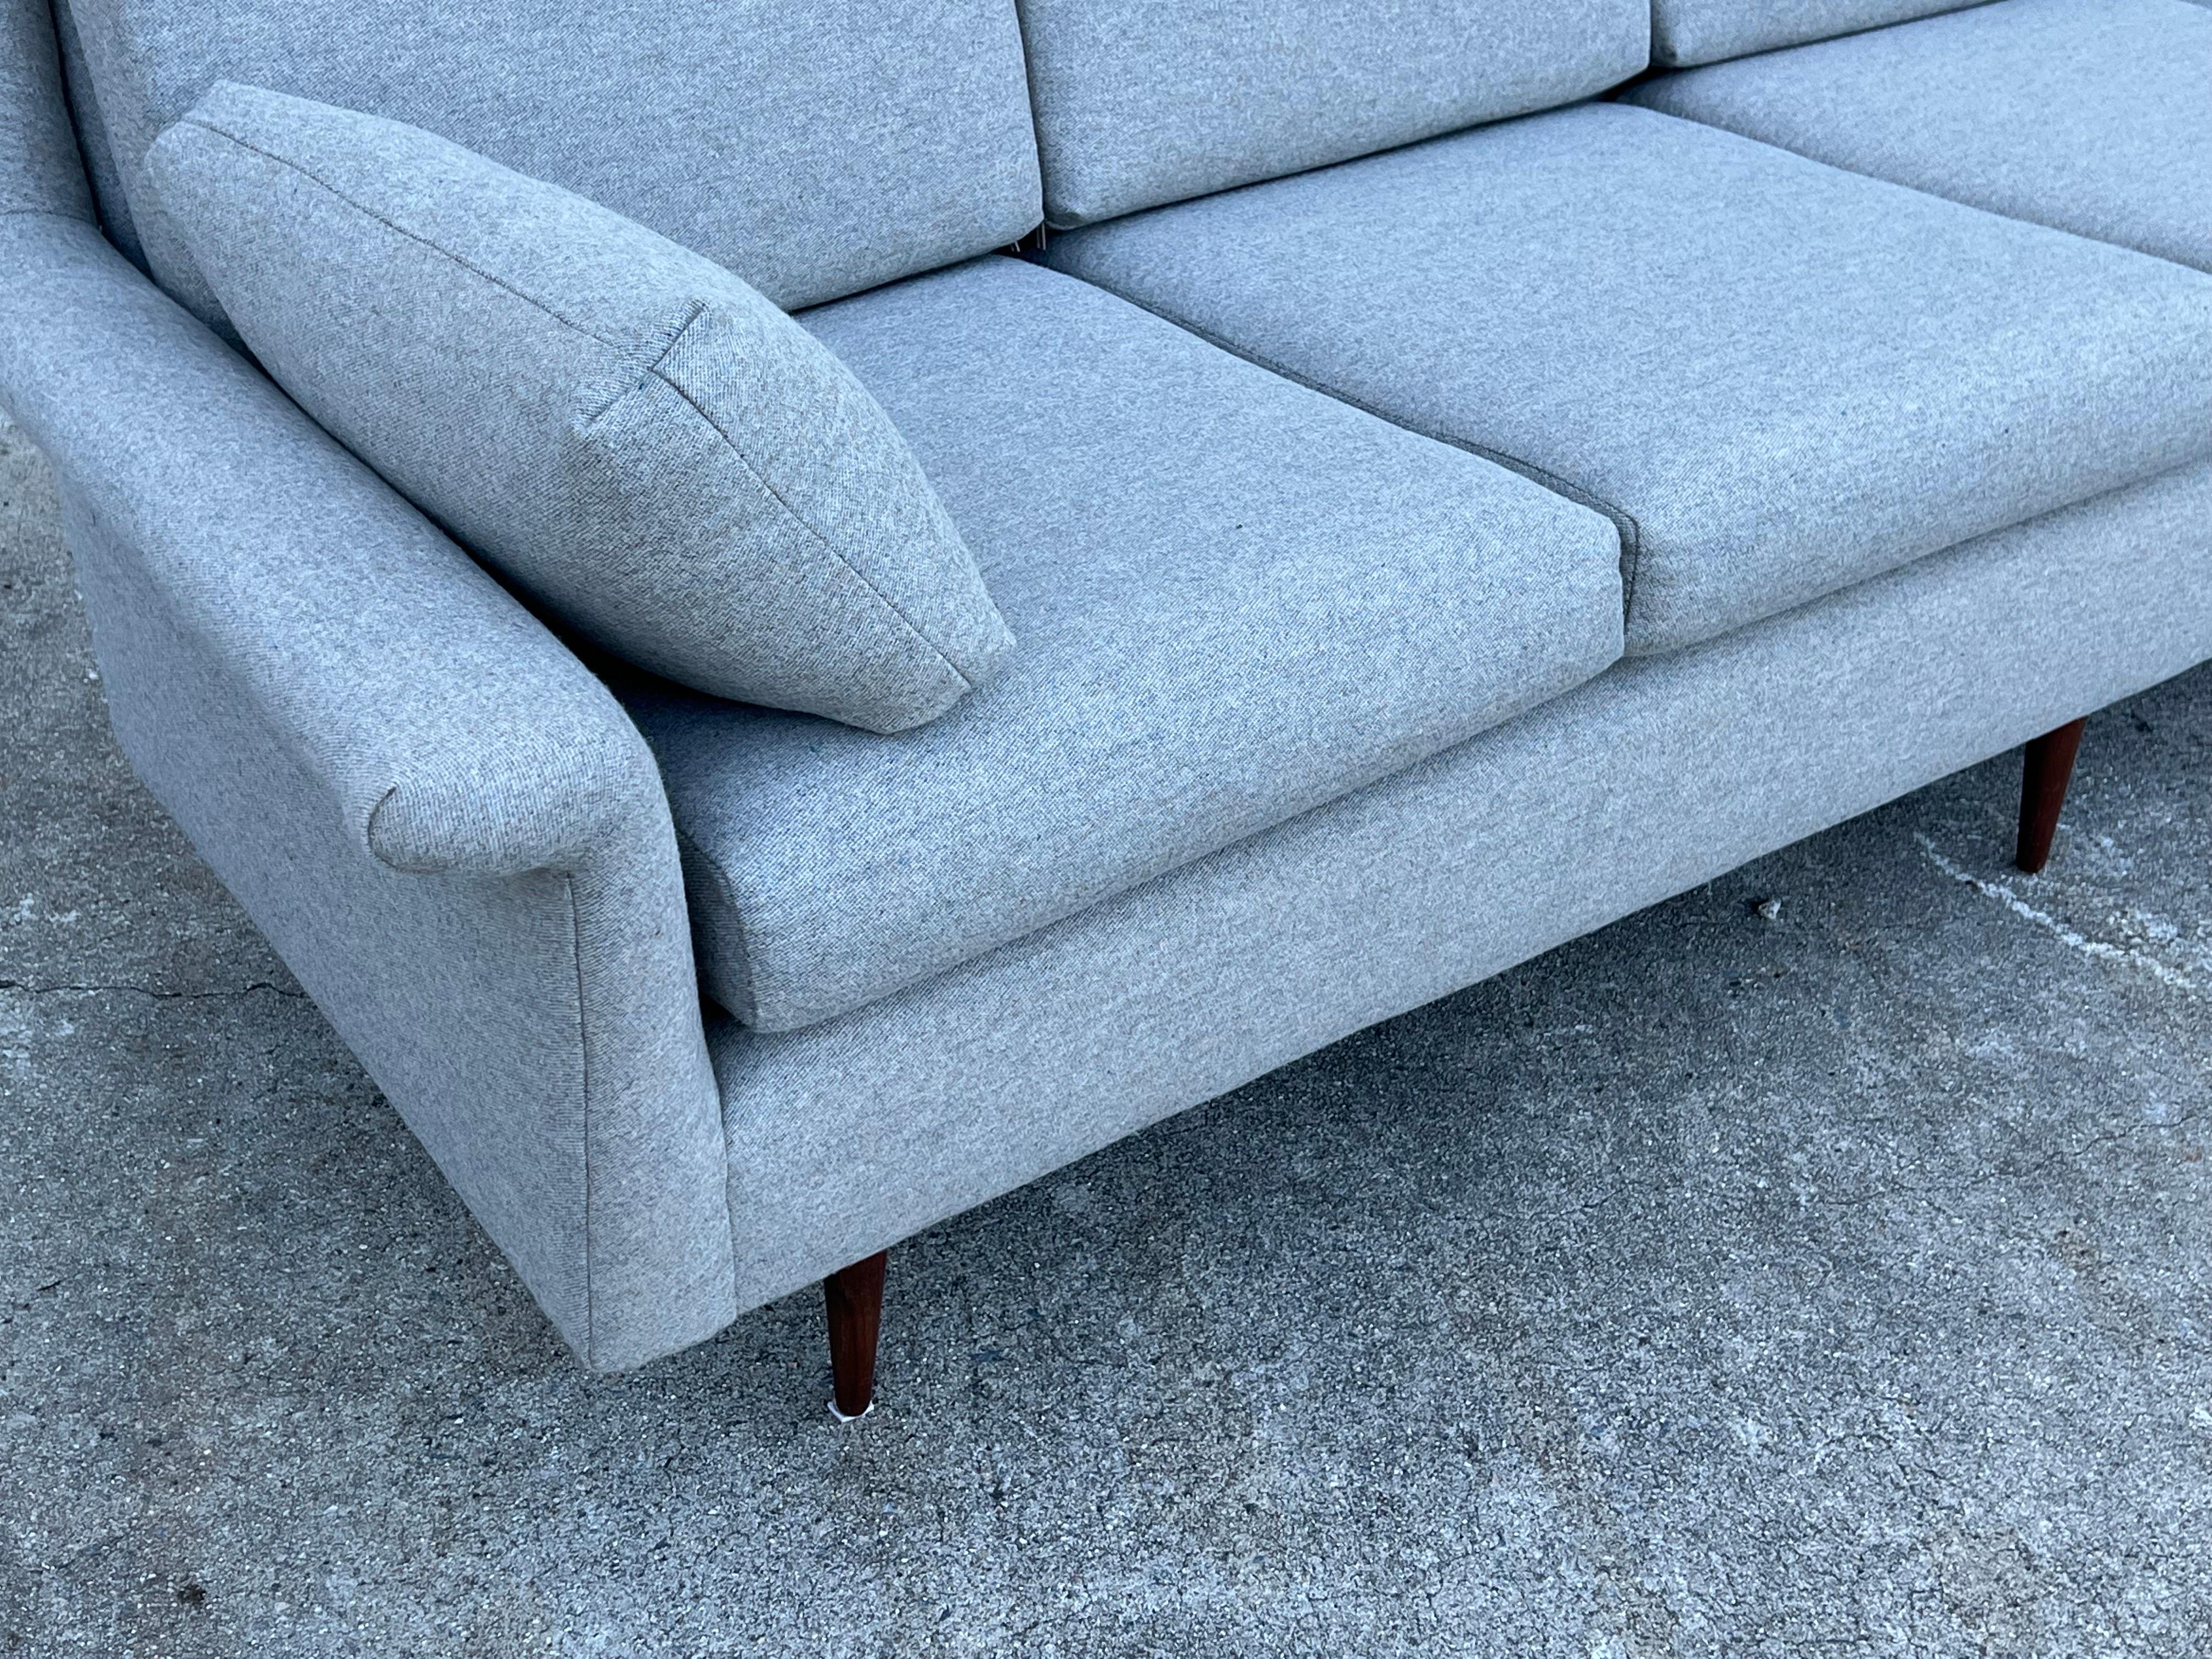 Mid-century four seater sofa designed by Milo Baughman for Thayer Coggin circa 1960s. It sits on five walnut tapered legs. We reupholstered the sofa in a wool blend fabric in a light gray color with subtle specks of blue. New foam for bottom and